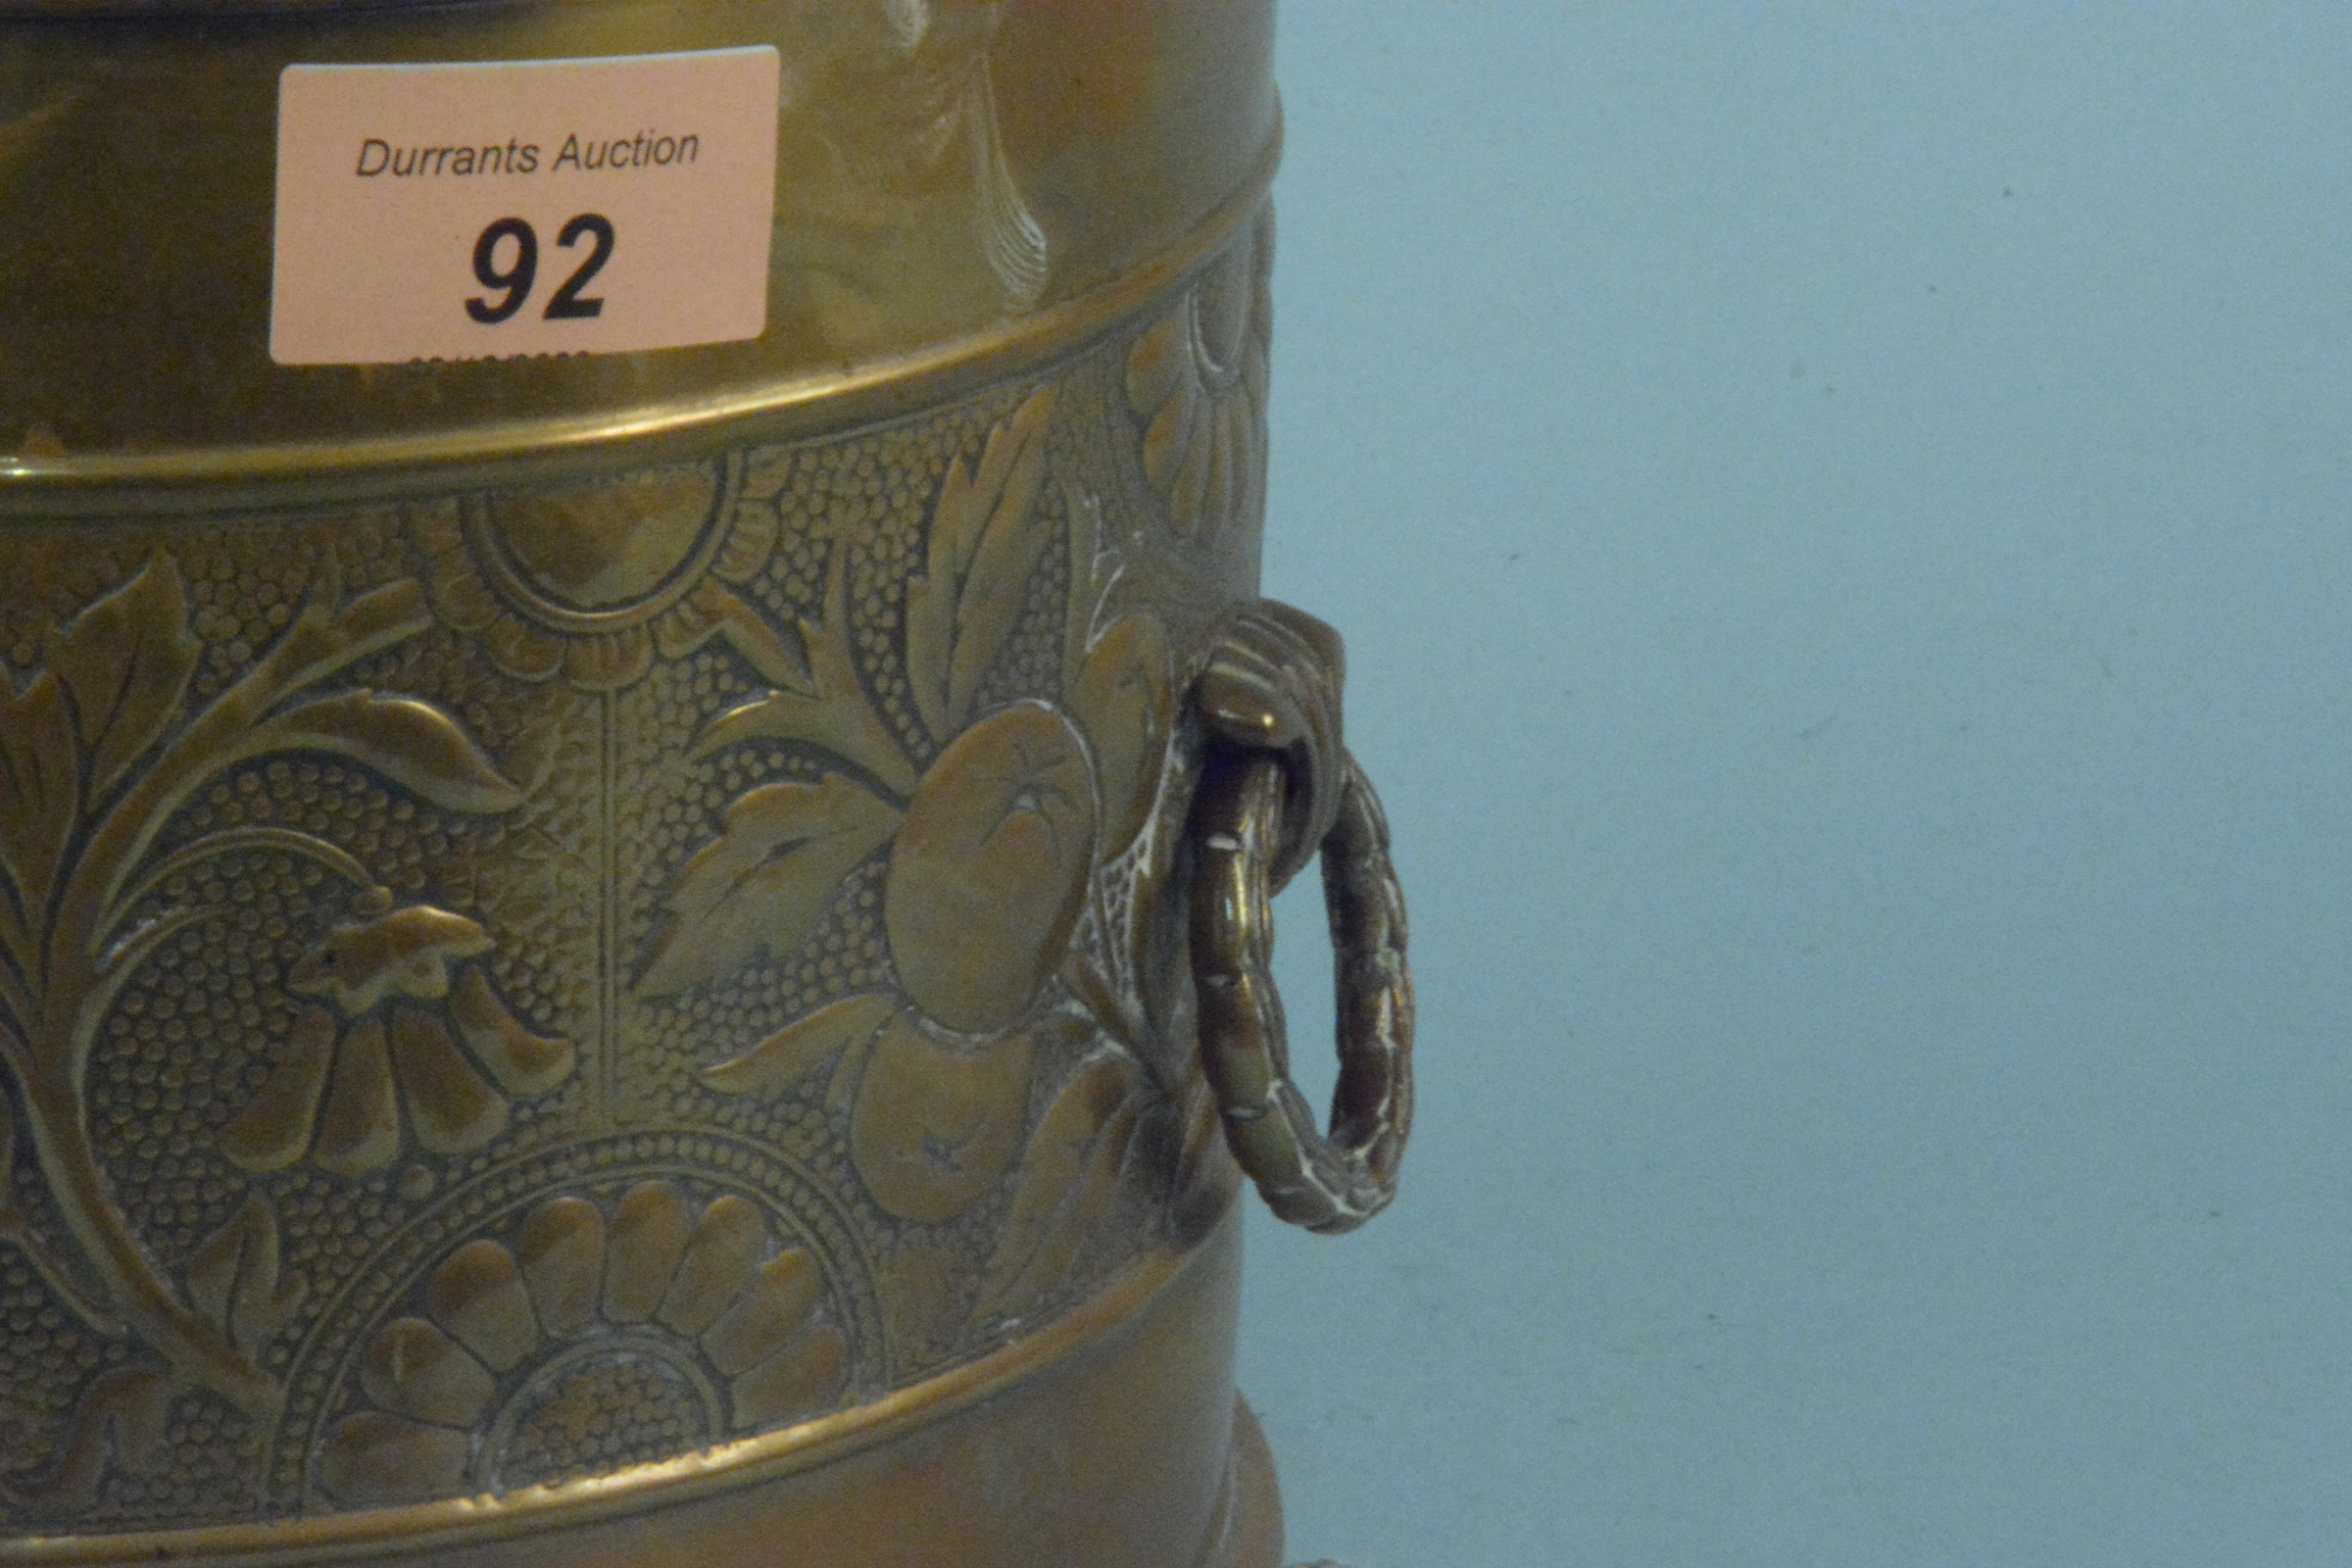 Aesthetic movement circular brass jardiniere with repousse decoration of fruit and flowers, - Image 2 of 3